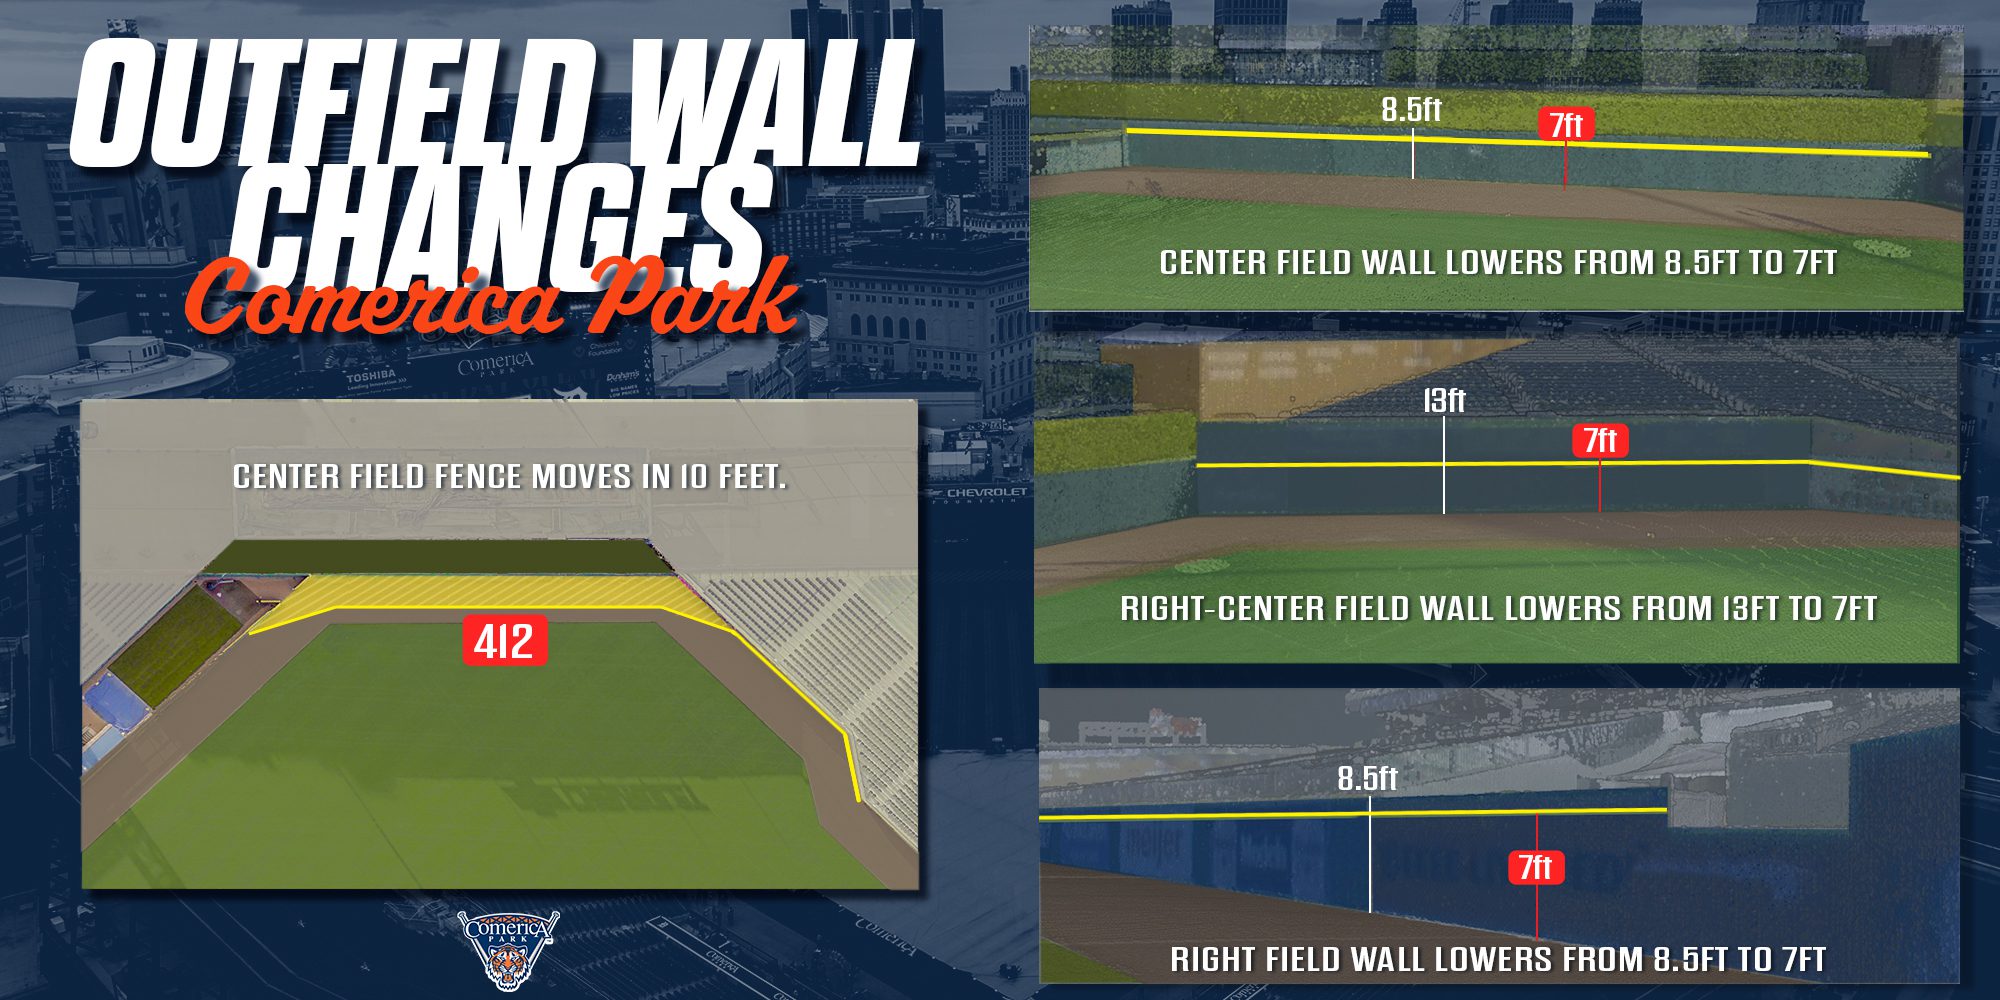 Tigers announce new Comerica Park outfield dimensions - Ballpark